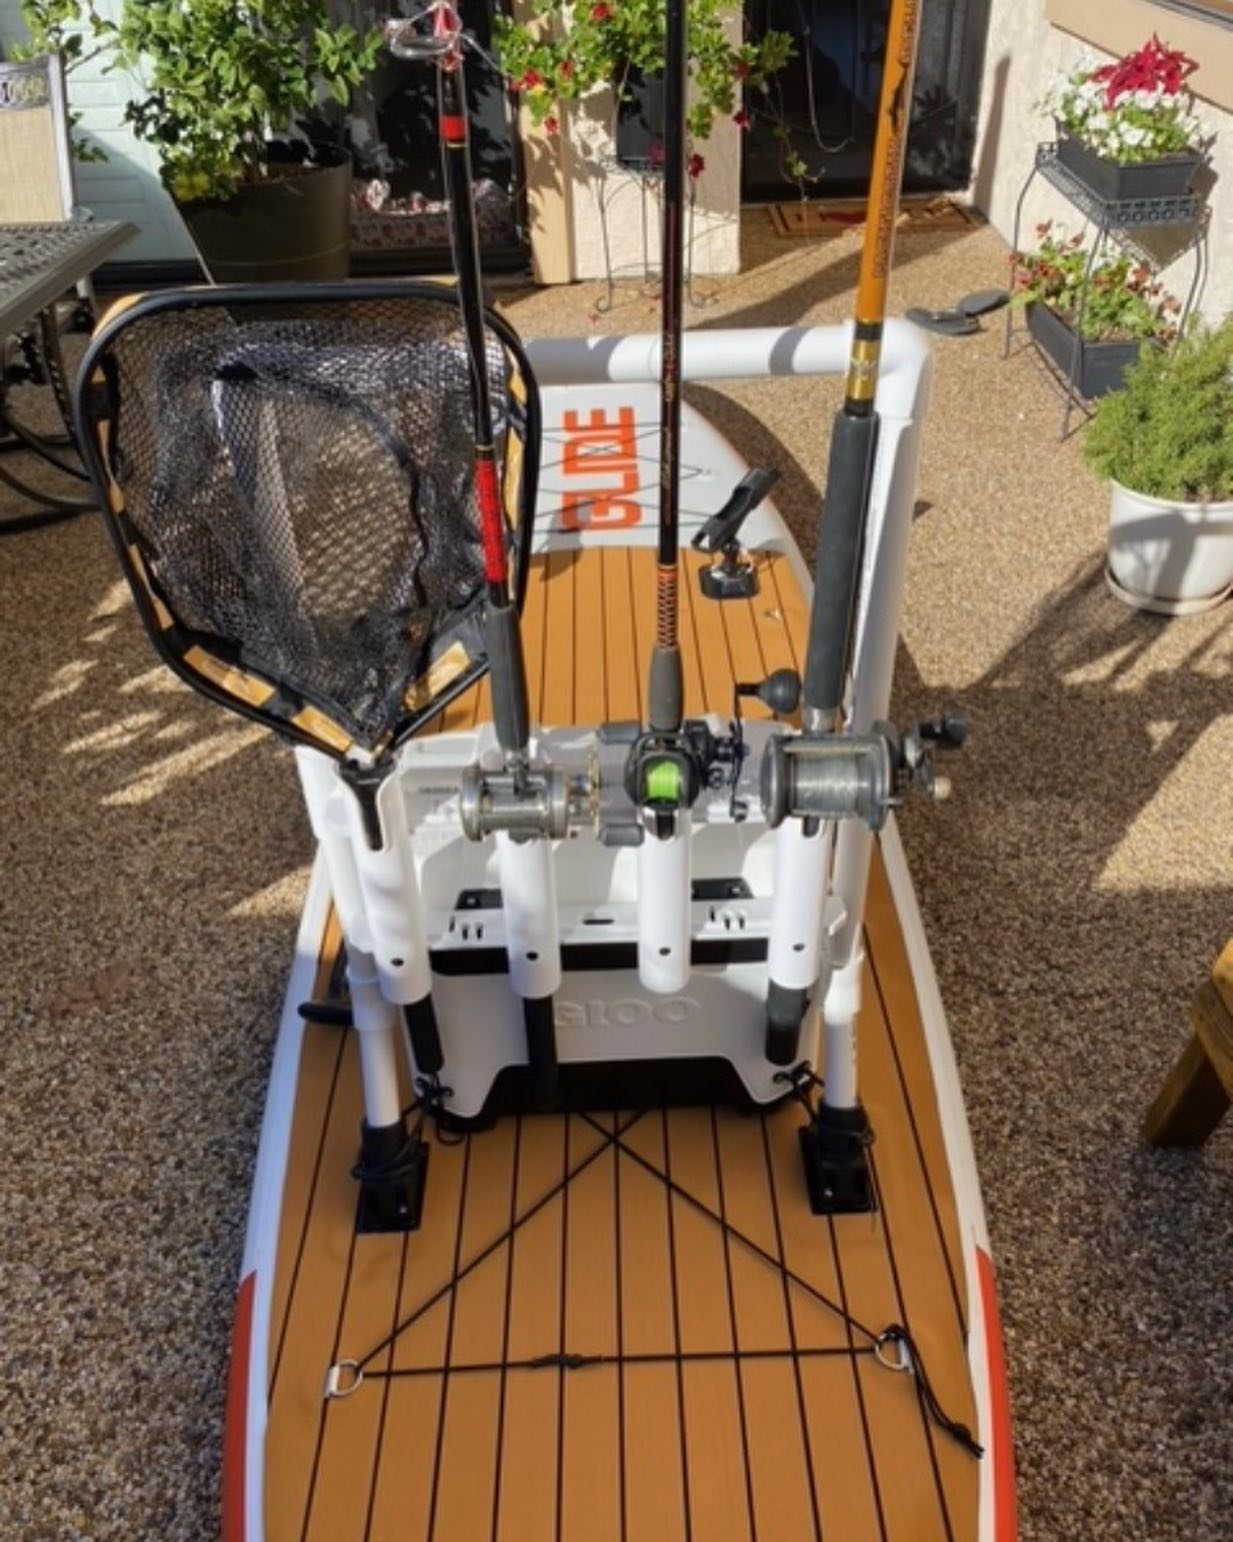 board volume for fishing rod holders and electric pump powered by a car battery